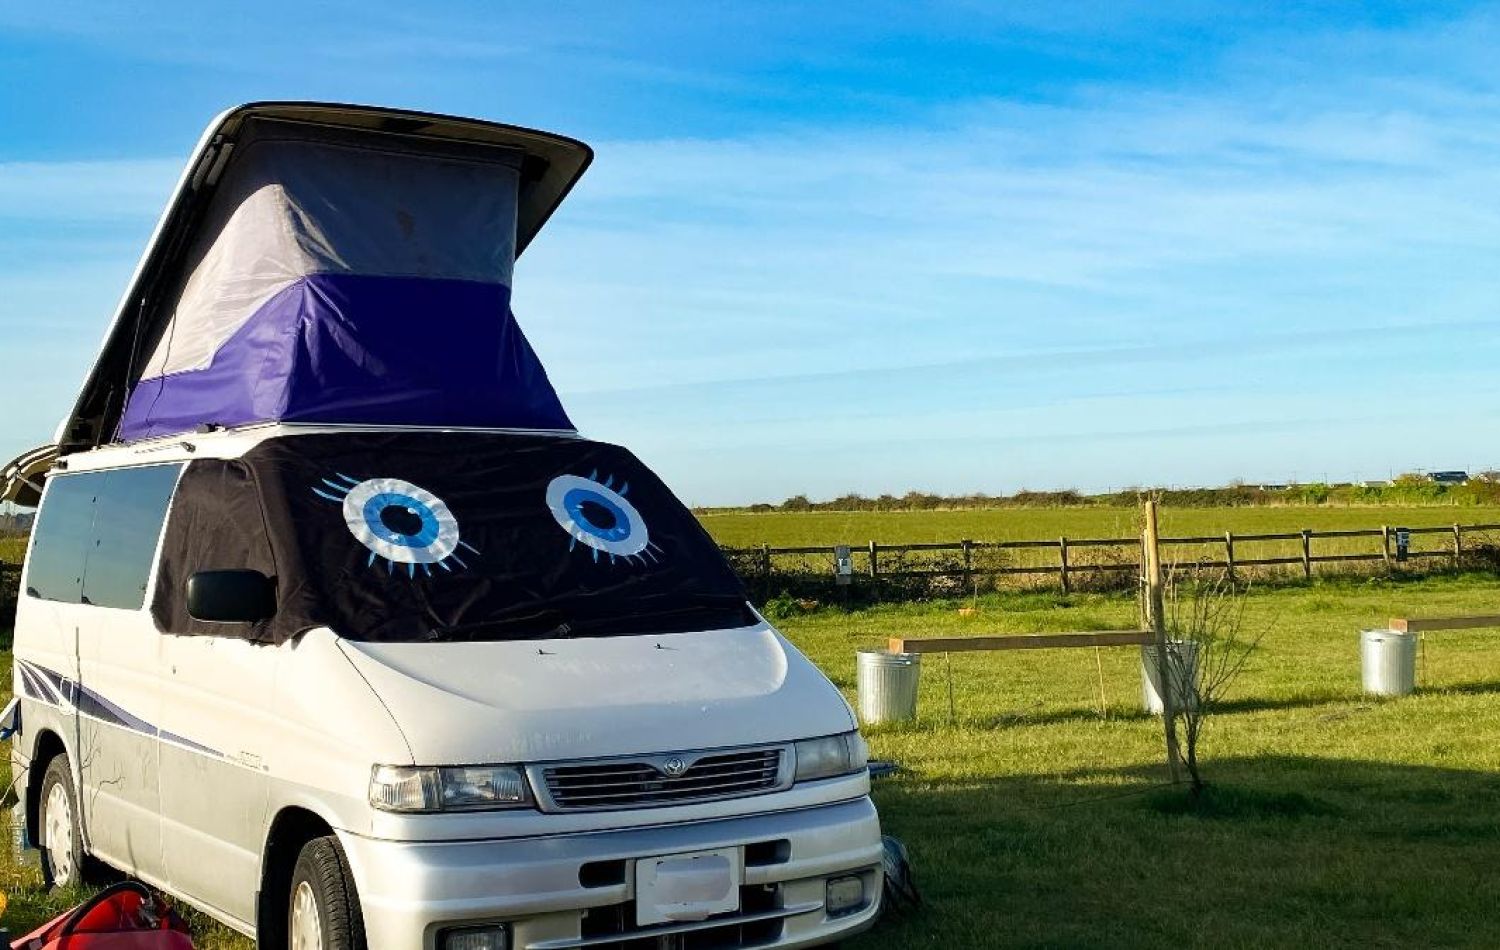 Campervan with roof tent basking in sunshine on a field